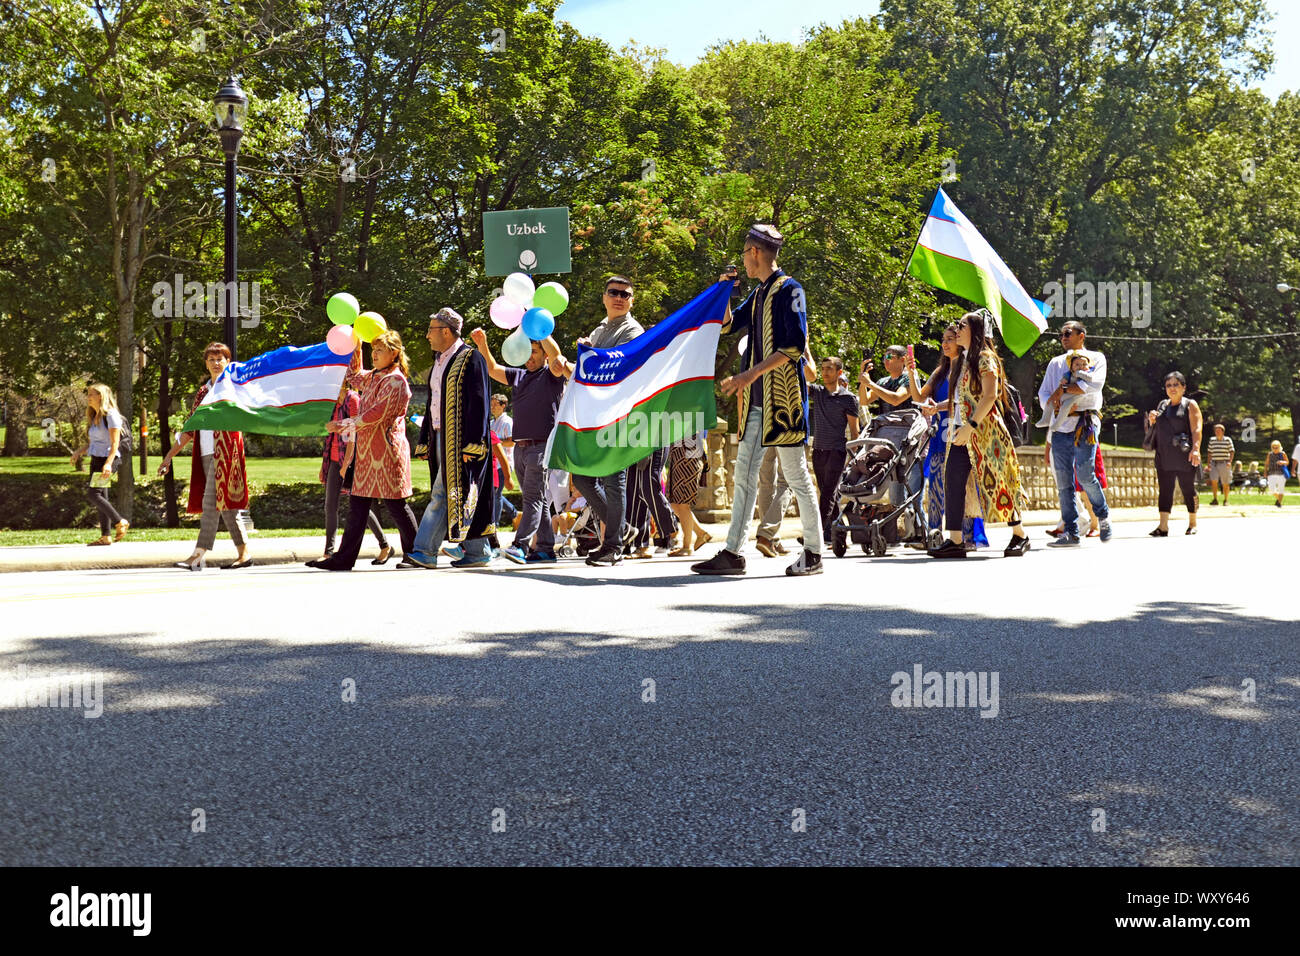 Participants in the 2019 One World Day celebration representing Uzbekistan wave their flag during the Cleveland, Ohio celebration on August 25, 2019 Stock Photo